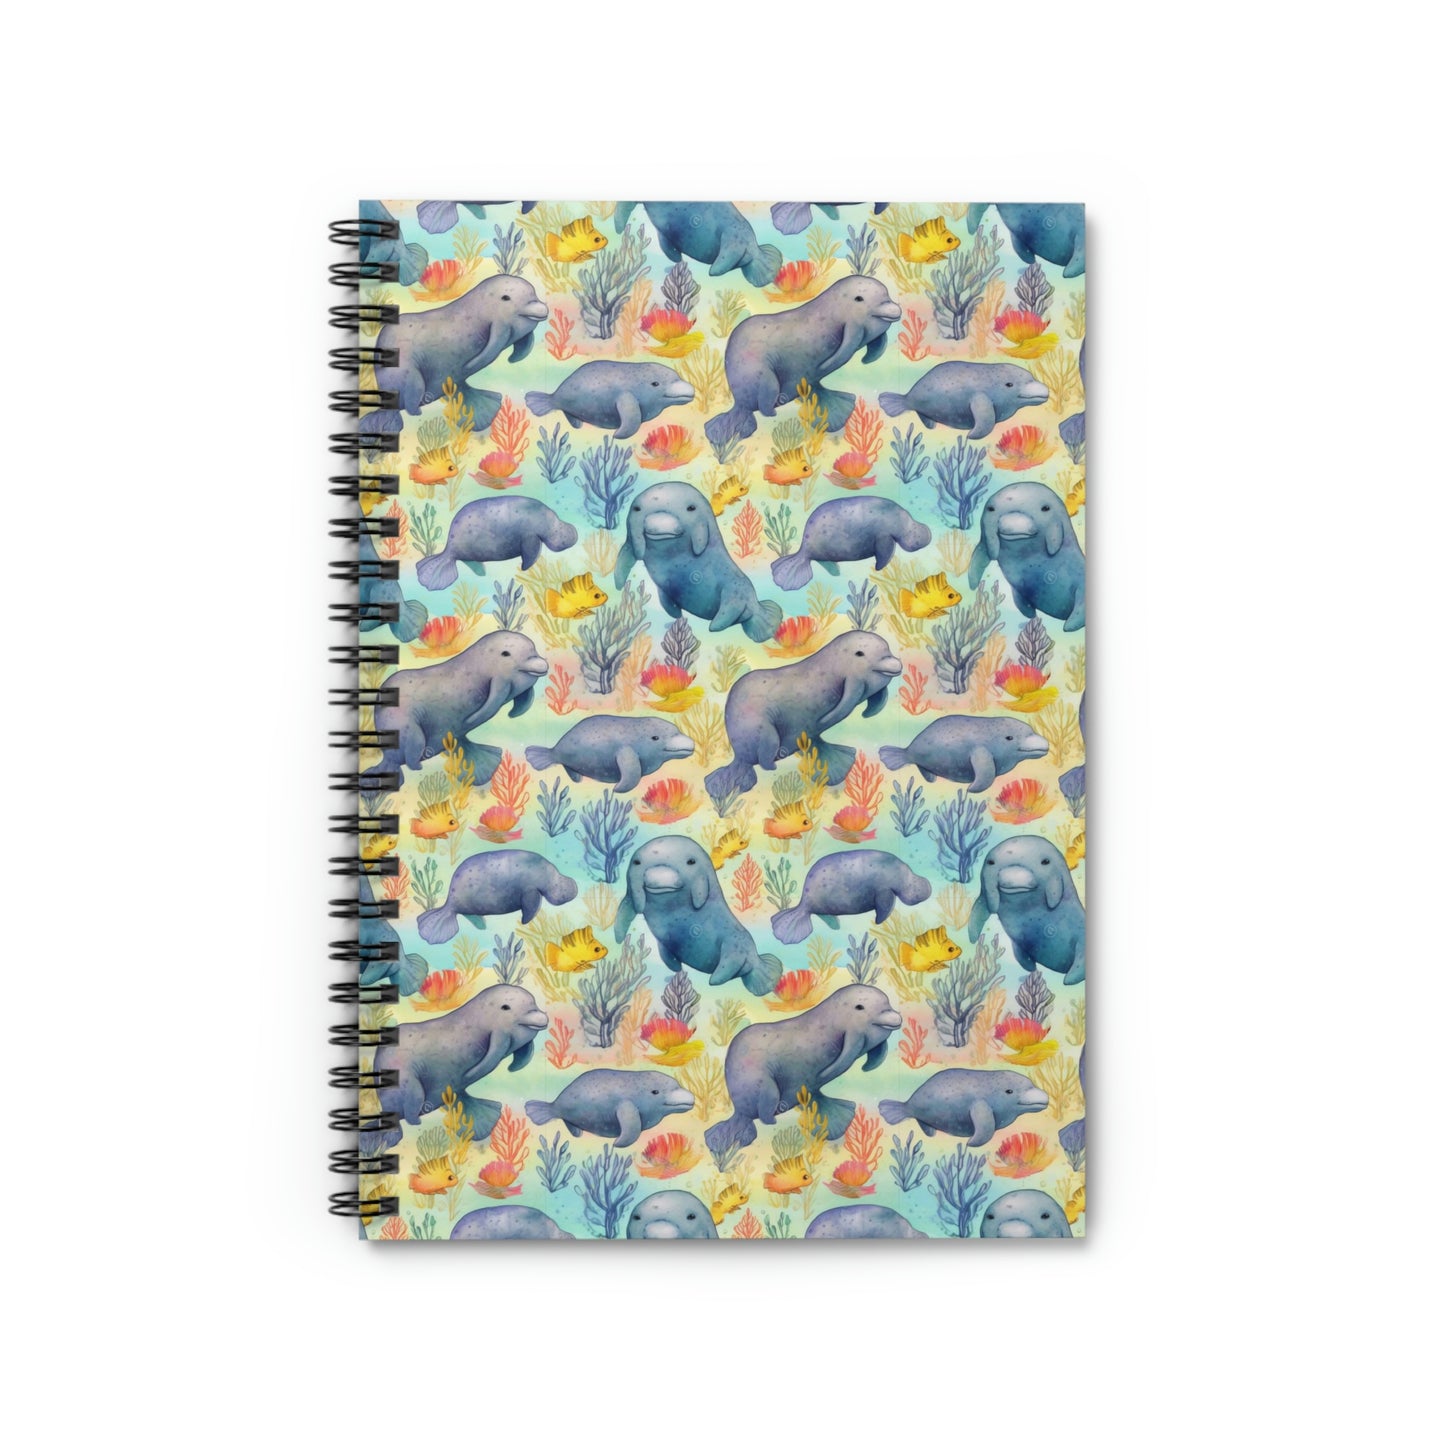 Manatee Spiral Notebook, Watercolor Fish Ocean Sea Pattern Design Journal Traveler Notepad Ruled Line Book Paper Pad Work Aesthetic Starcove Fashion